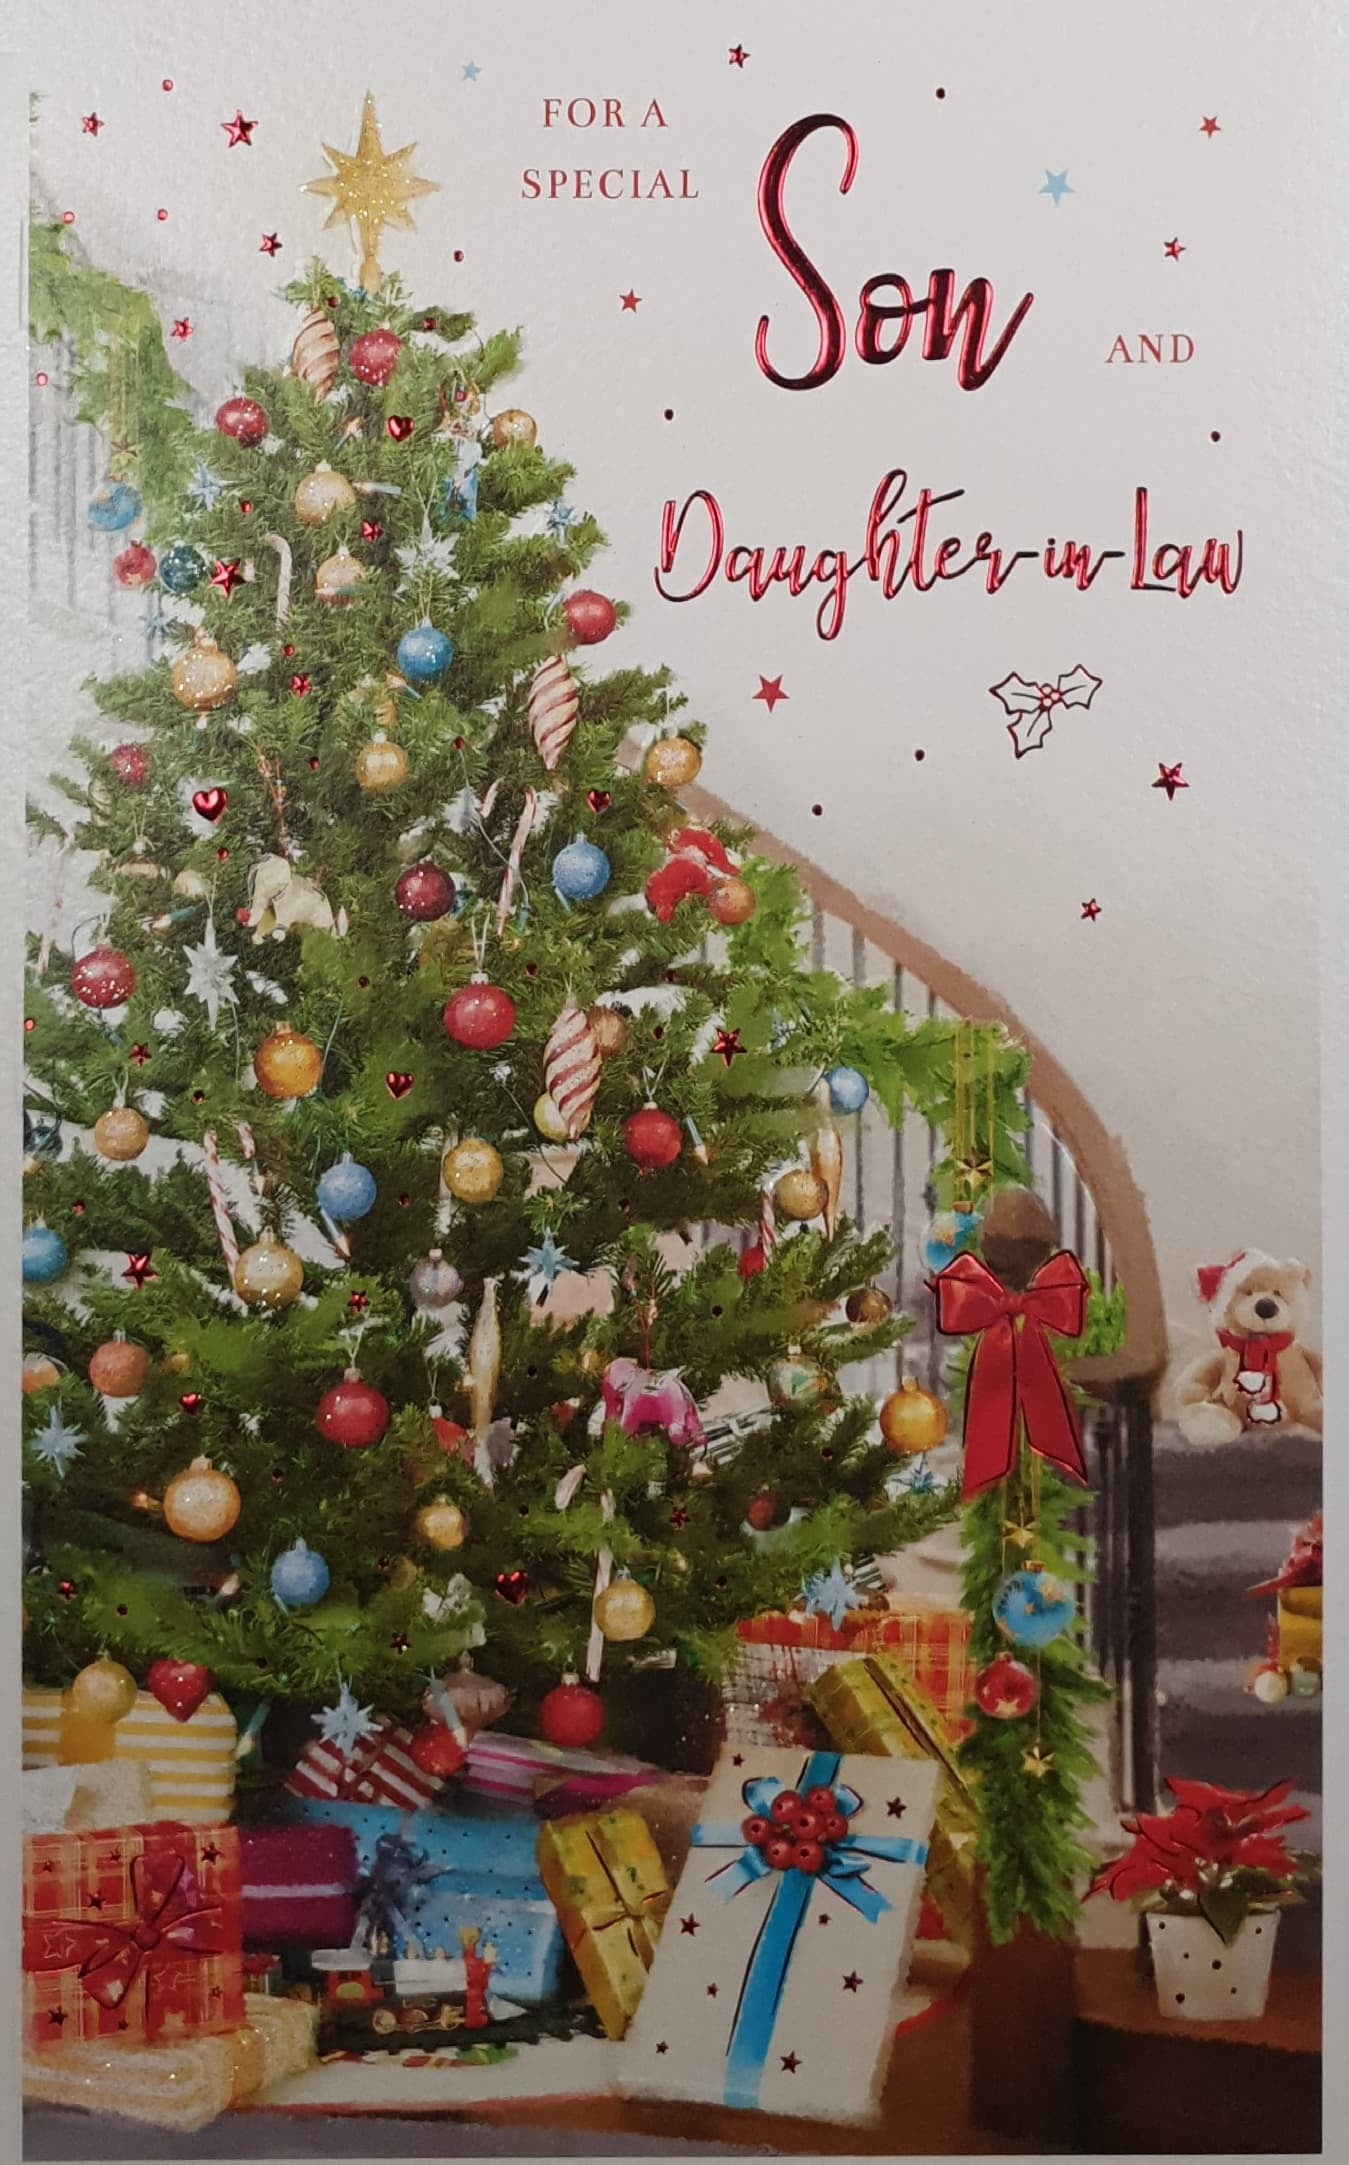 Son & Daughter in Law Christmas Card - Colourful Decorated Christmas Tree